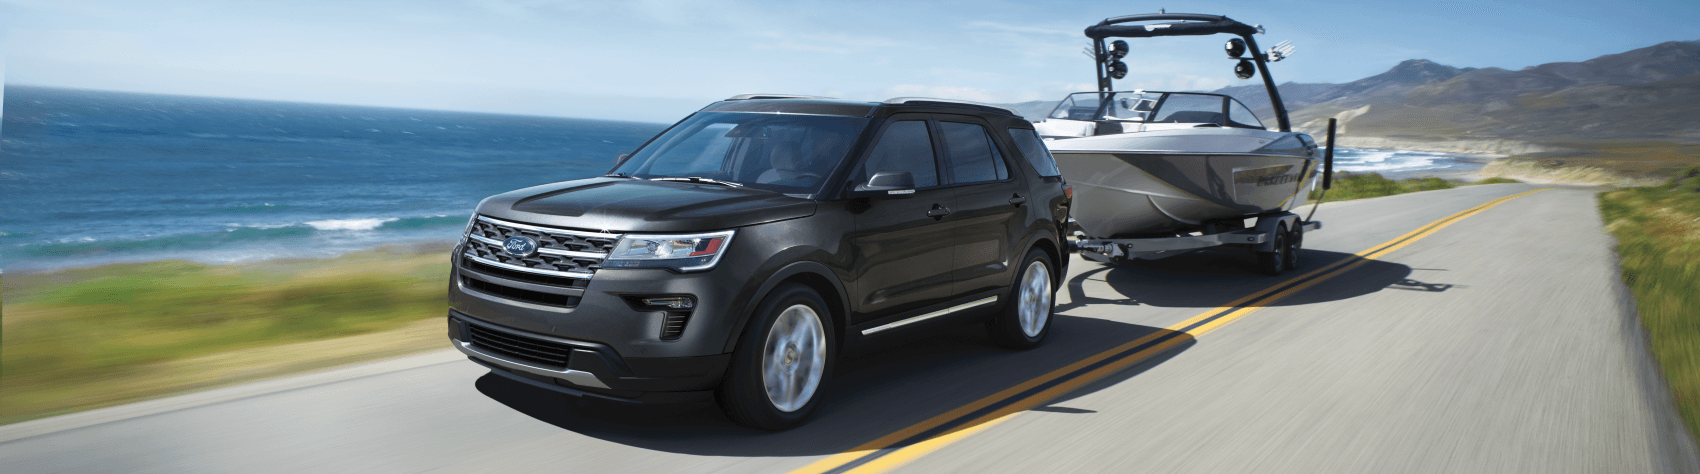 Used 2019 Ford Explorer Towing Boat